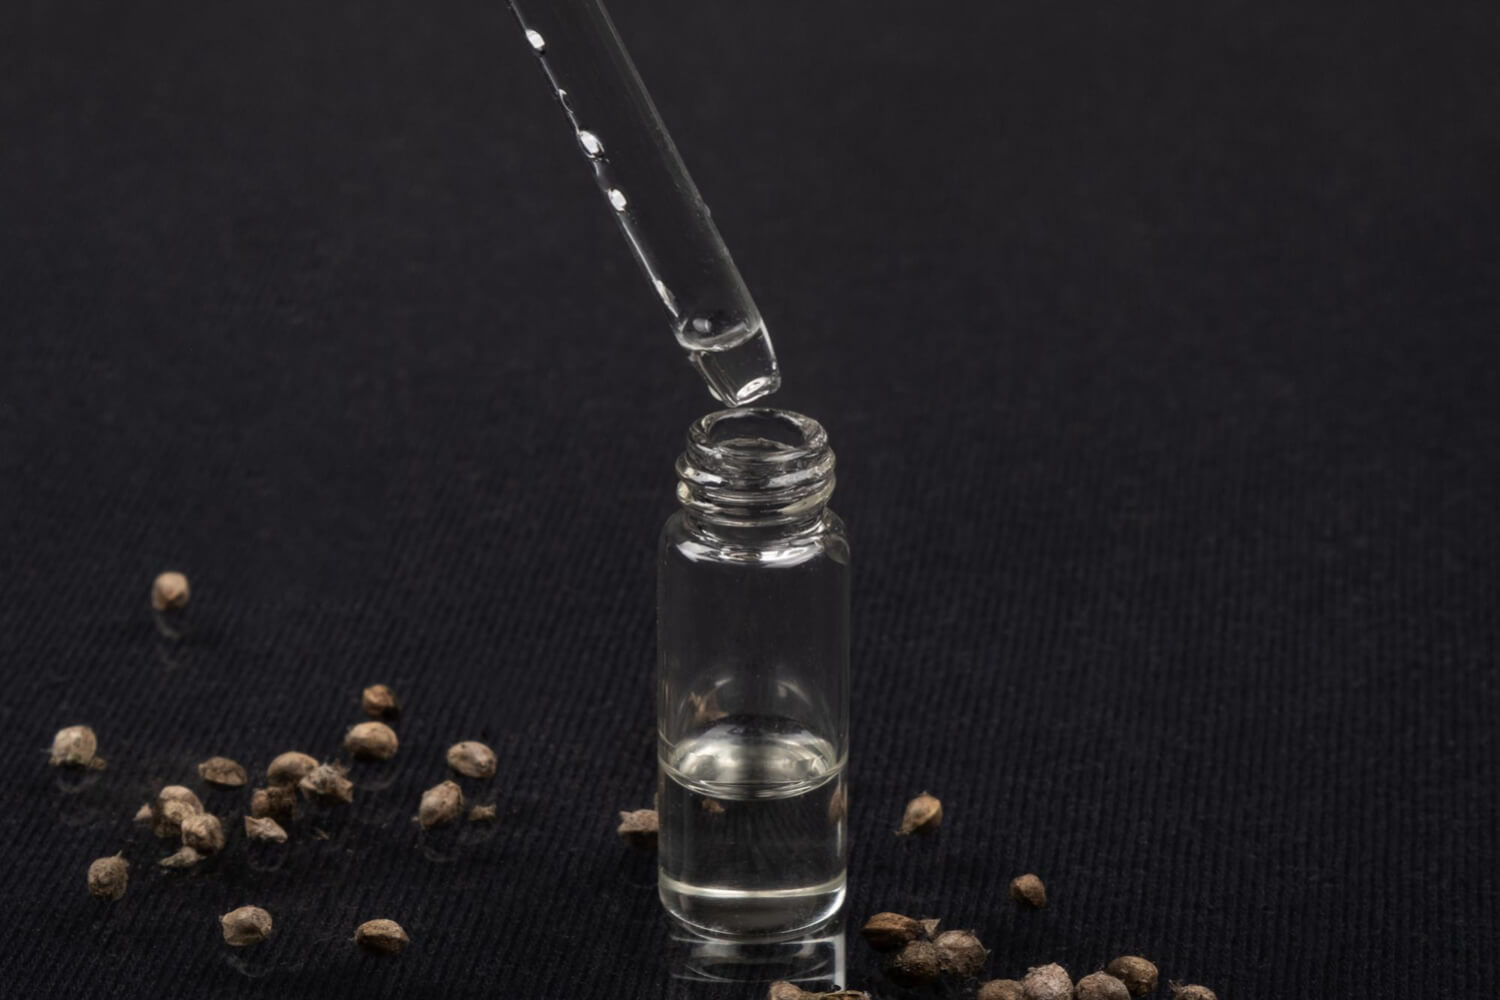 How to use Cannabis Tincture? Recipes and ways to use the tincture.